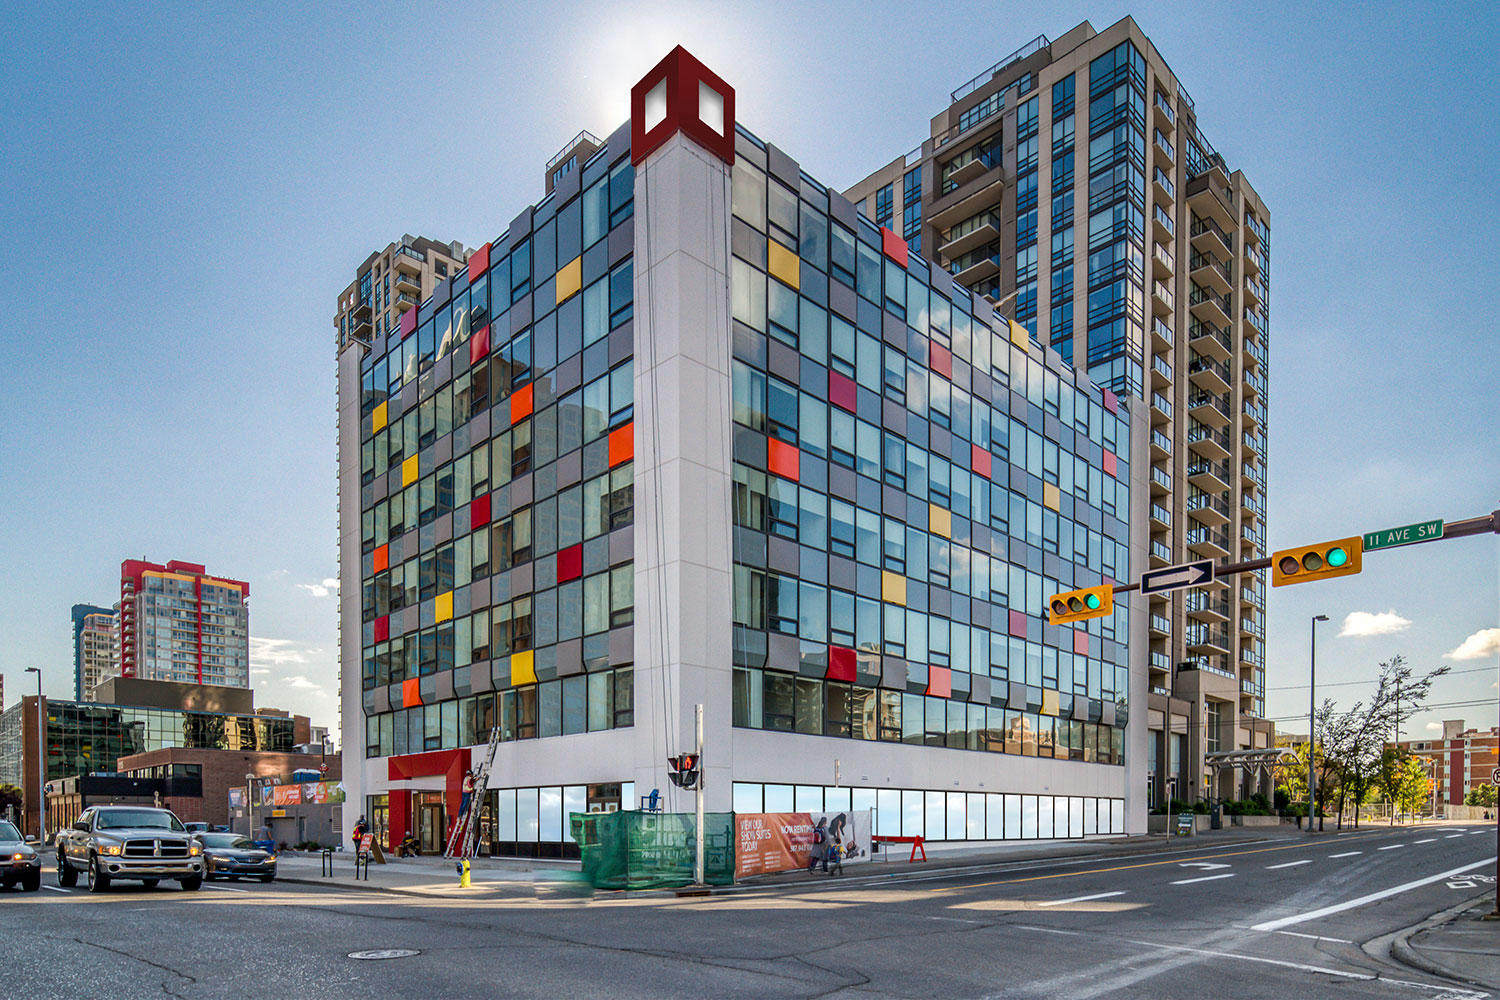 Cube, Strategic Group's office-to-residential conversion project in the Beltline, is one example of adaptive reuse in action.
Courtesy of Strategic Group